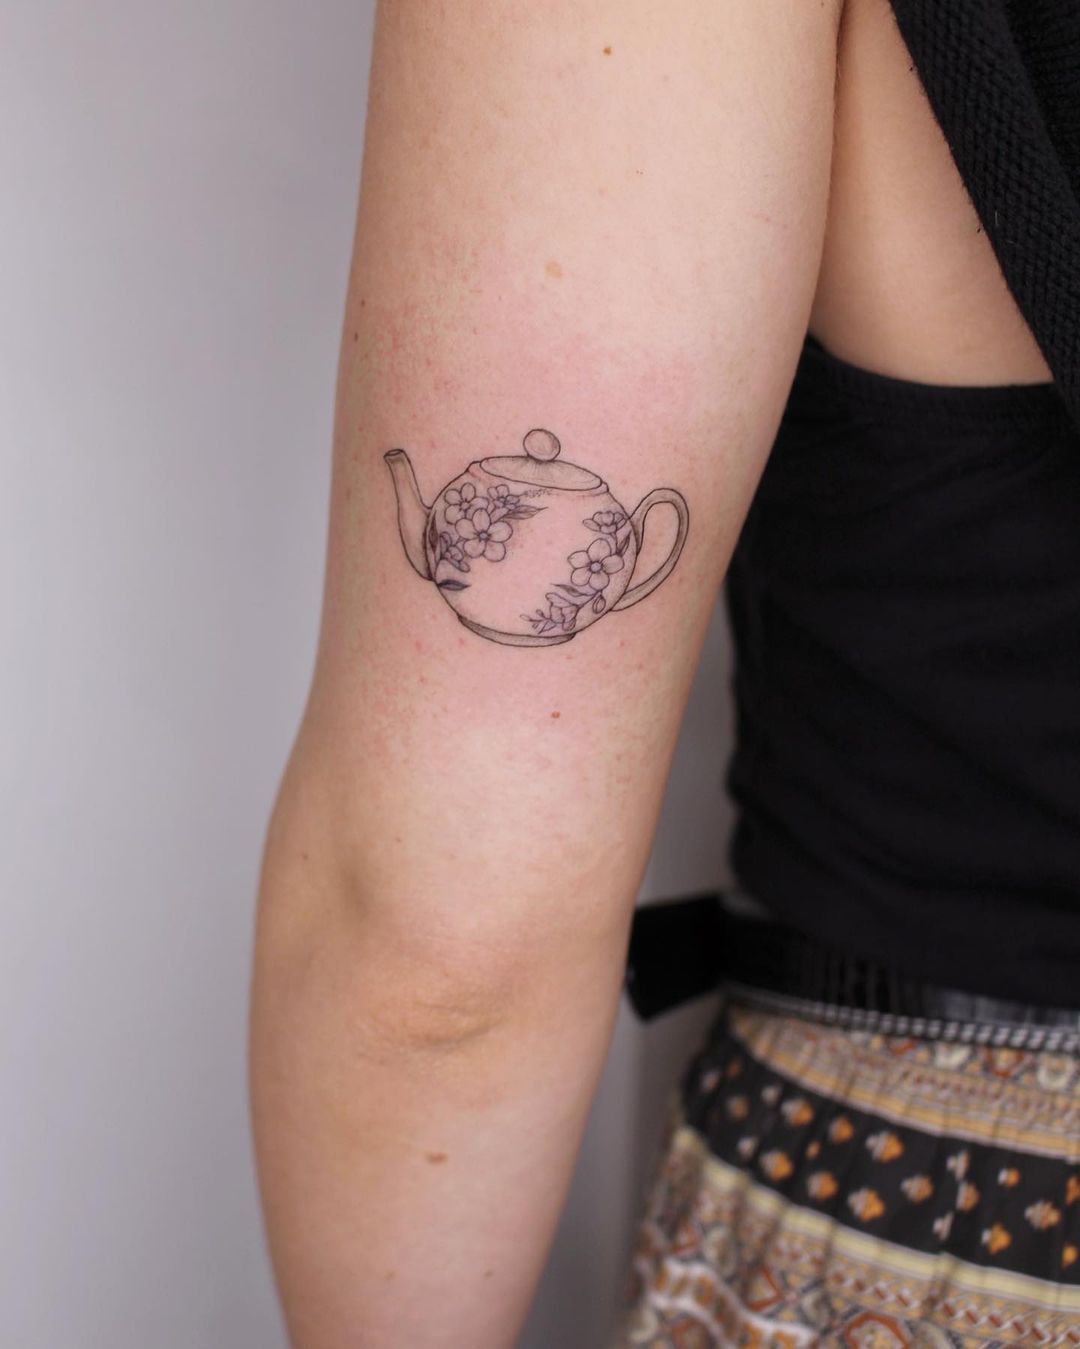 Teapot Chestpiece - BME: Tattoo, Piercing and Body Modification NewsBME:  Tattoo, Piercing and Body Modification News